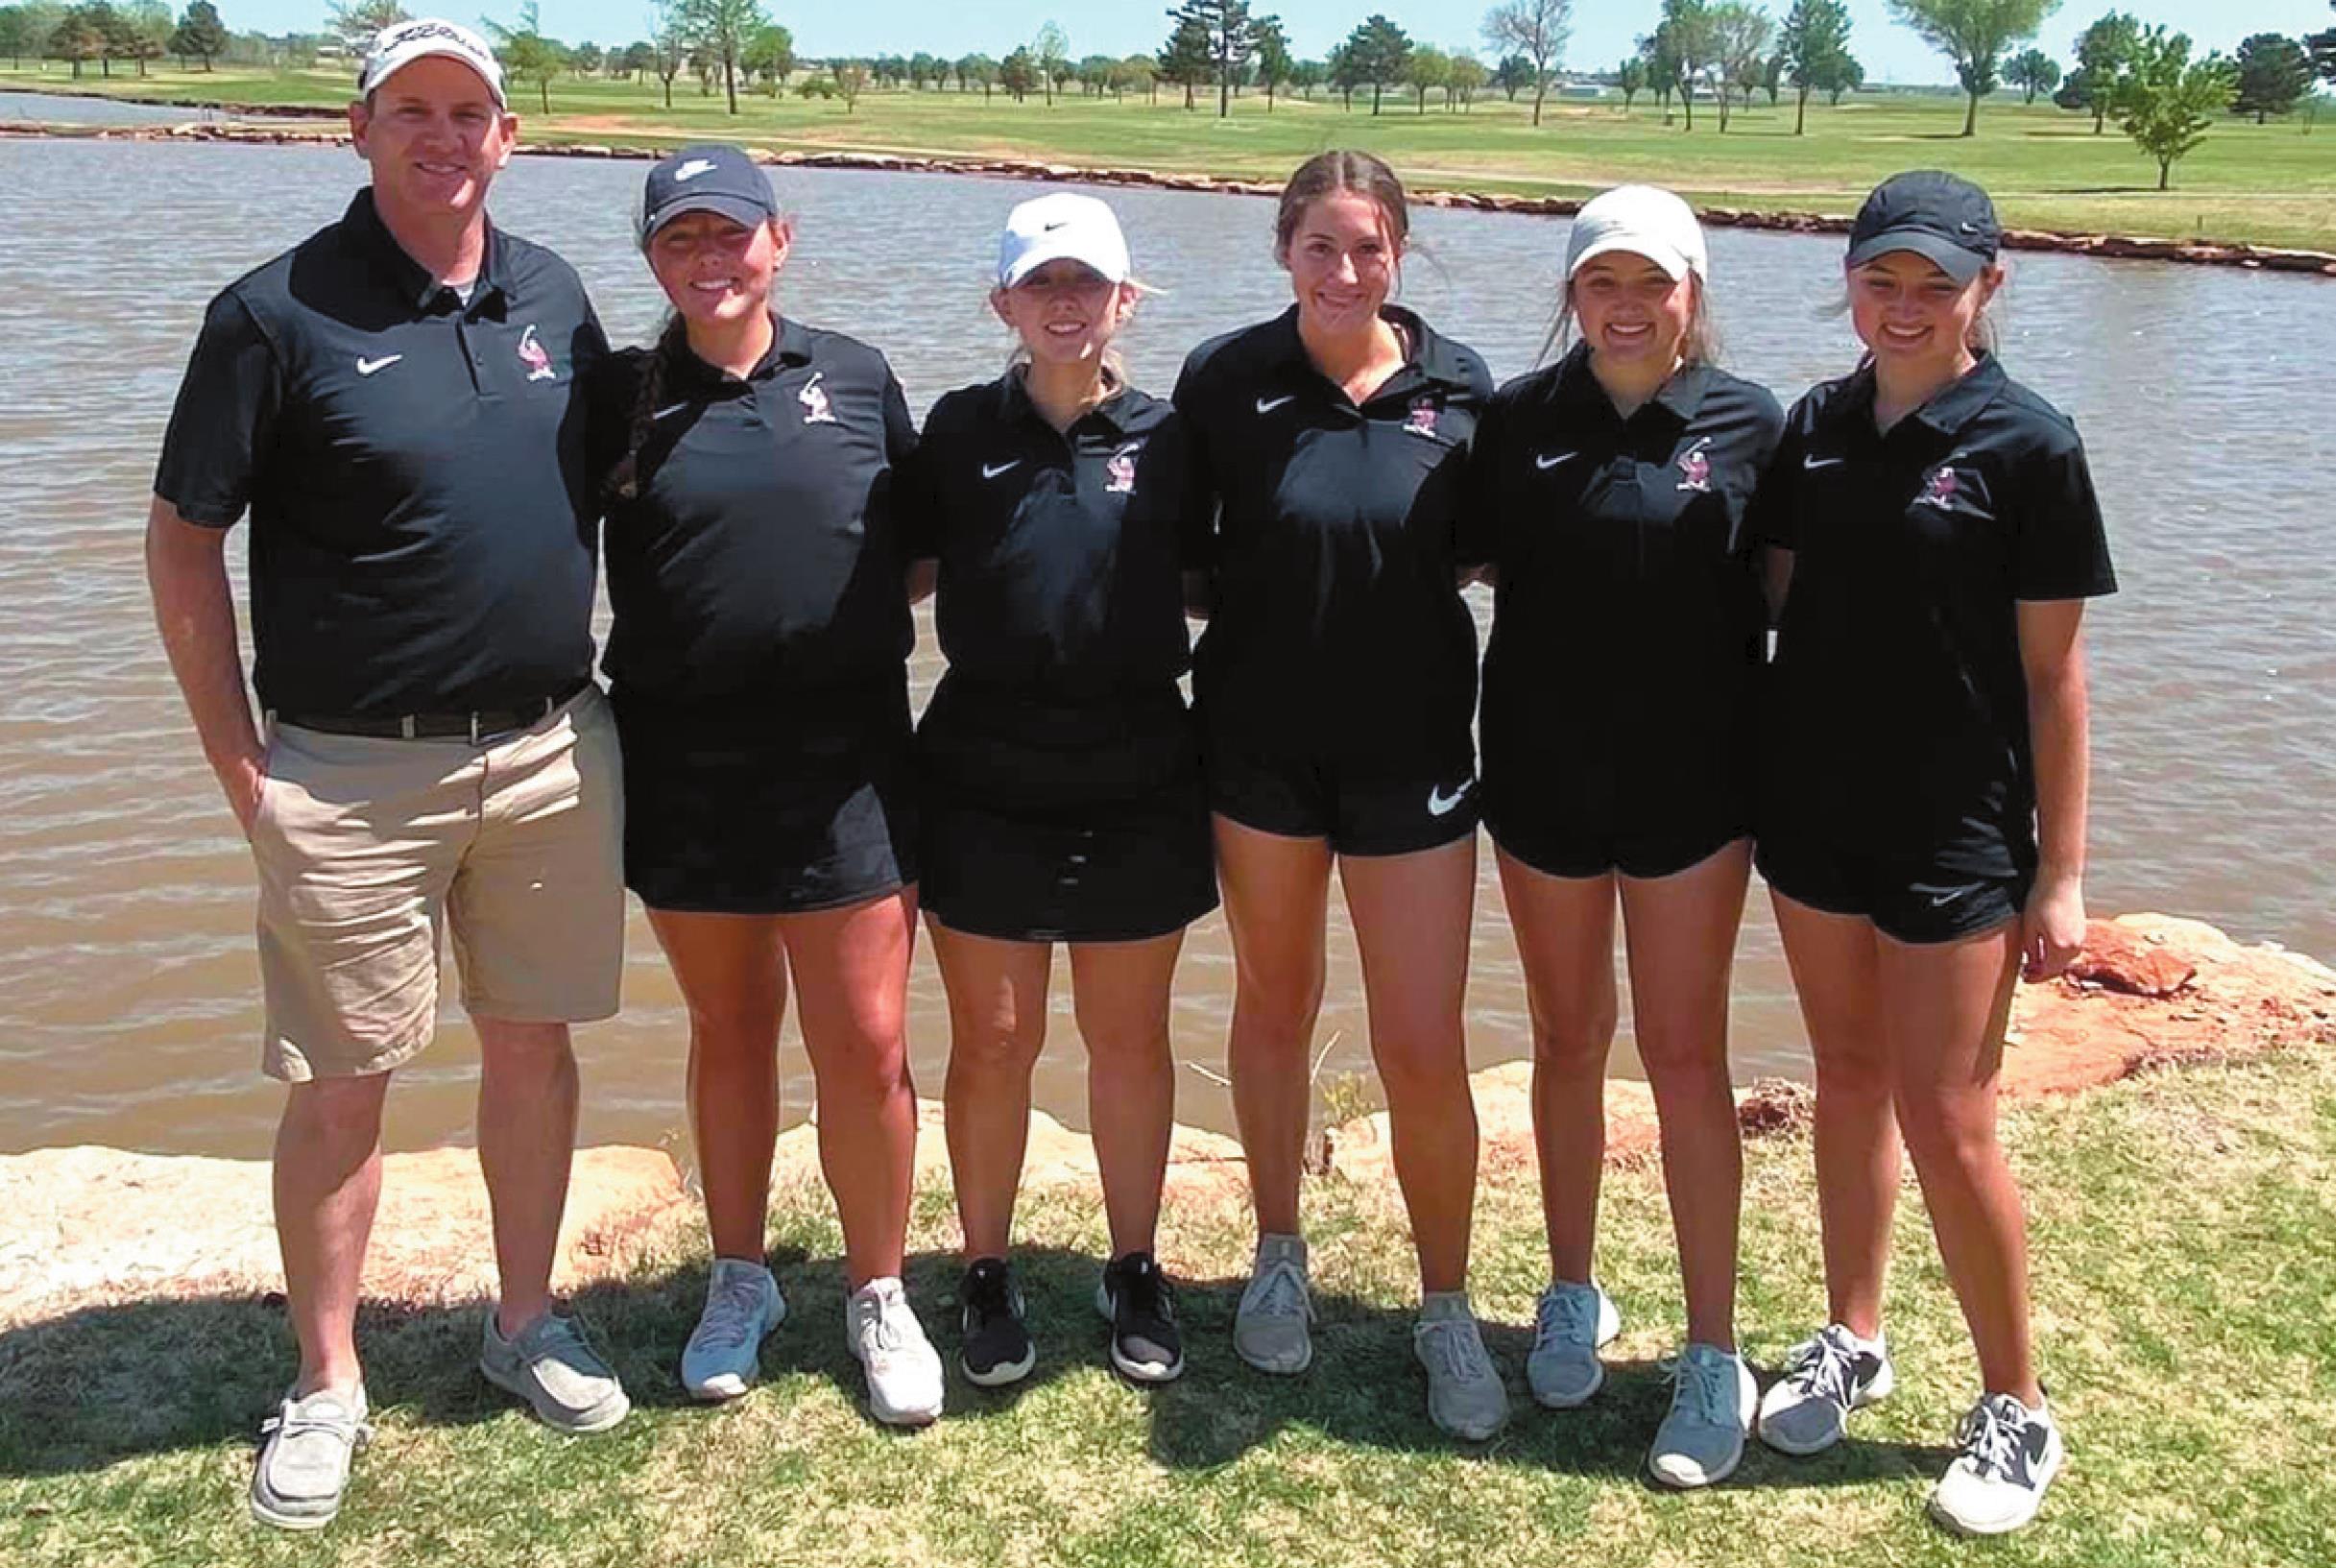 Coach Kyle Mickley, left, is pictured with the Weatherford girls golf team. Team members are, from left, Chloe Cummins, Rachel Carruth, Maddy Hada, Addison Elwick and McKinley Elwick. The team finished second at the regional tournament in Kingfisher. Josh Jennings/WDN